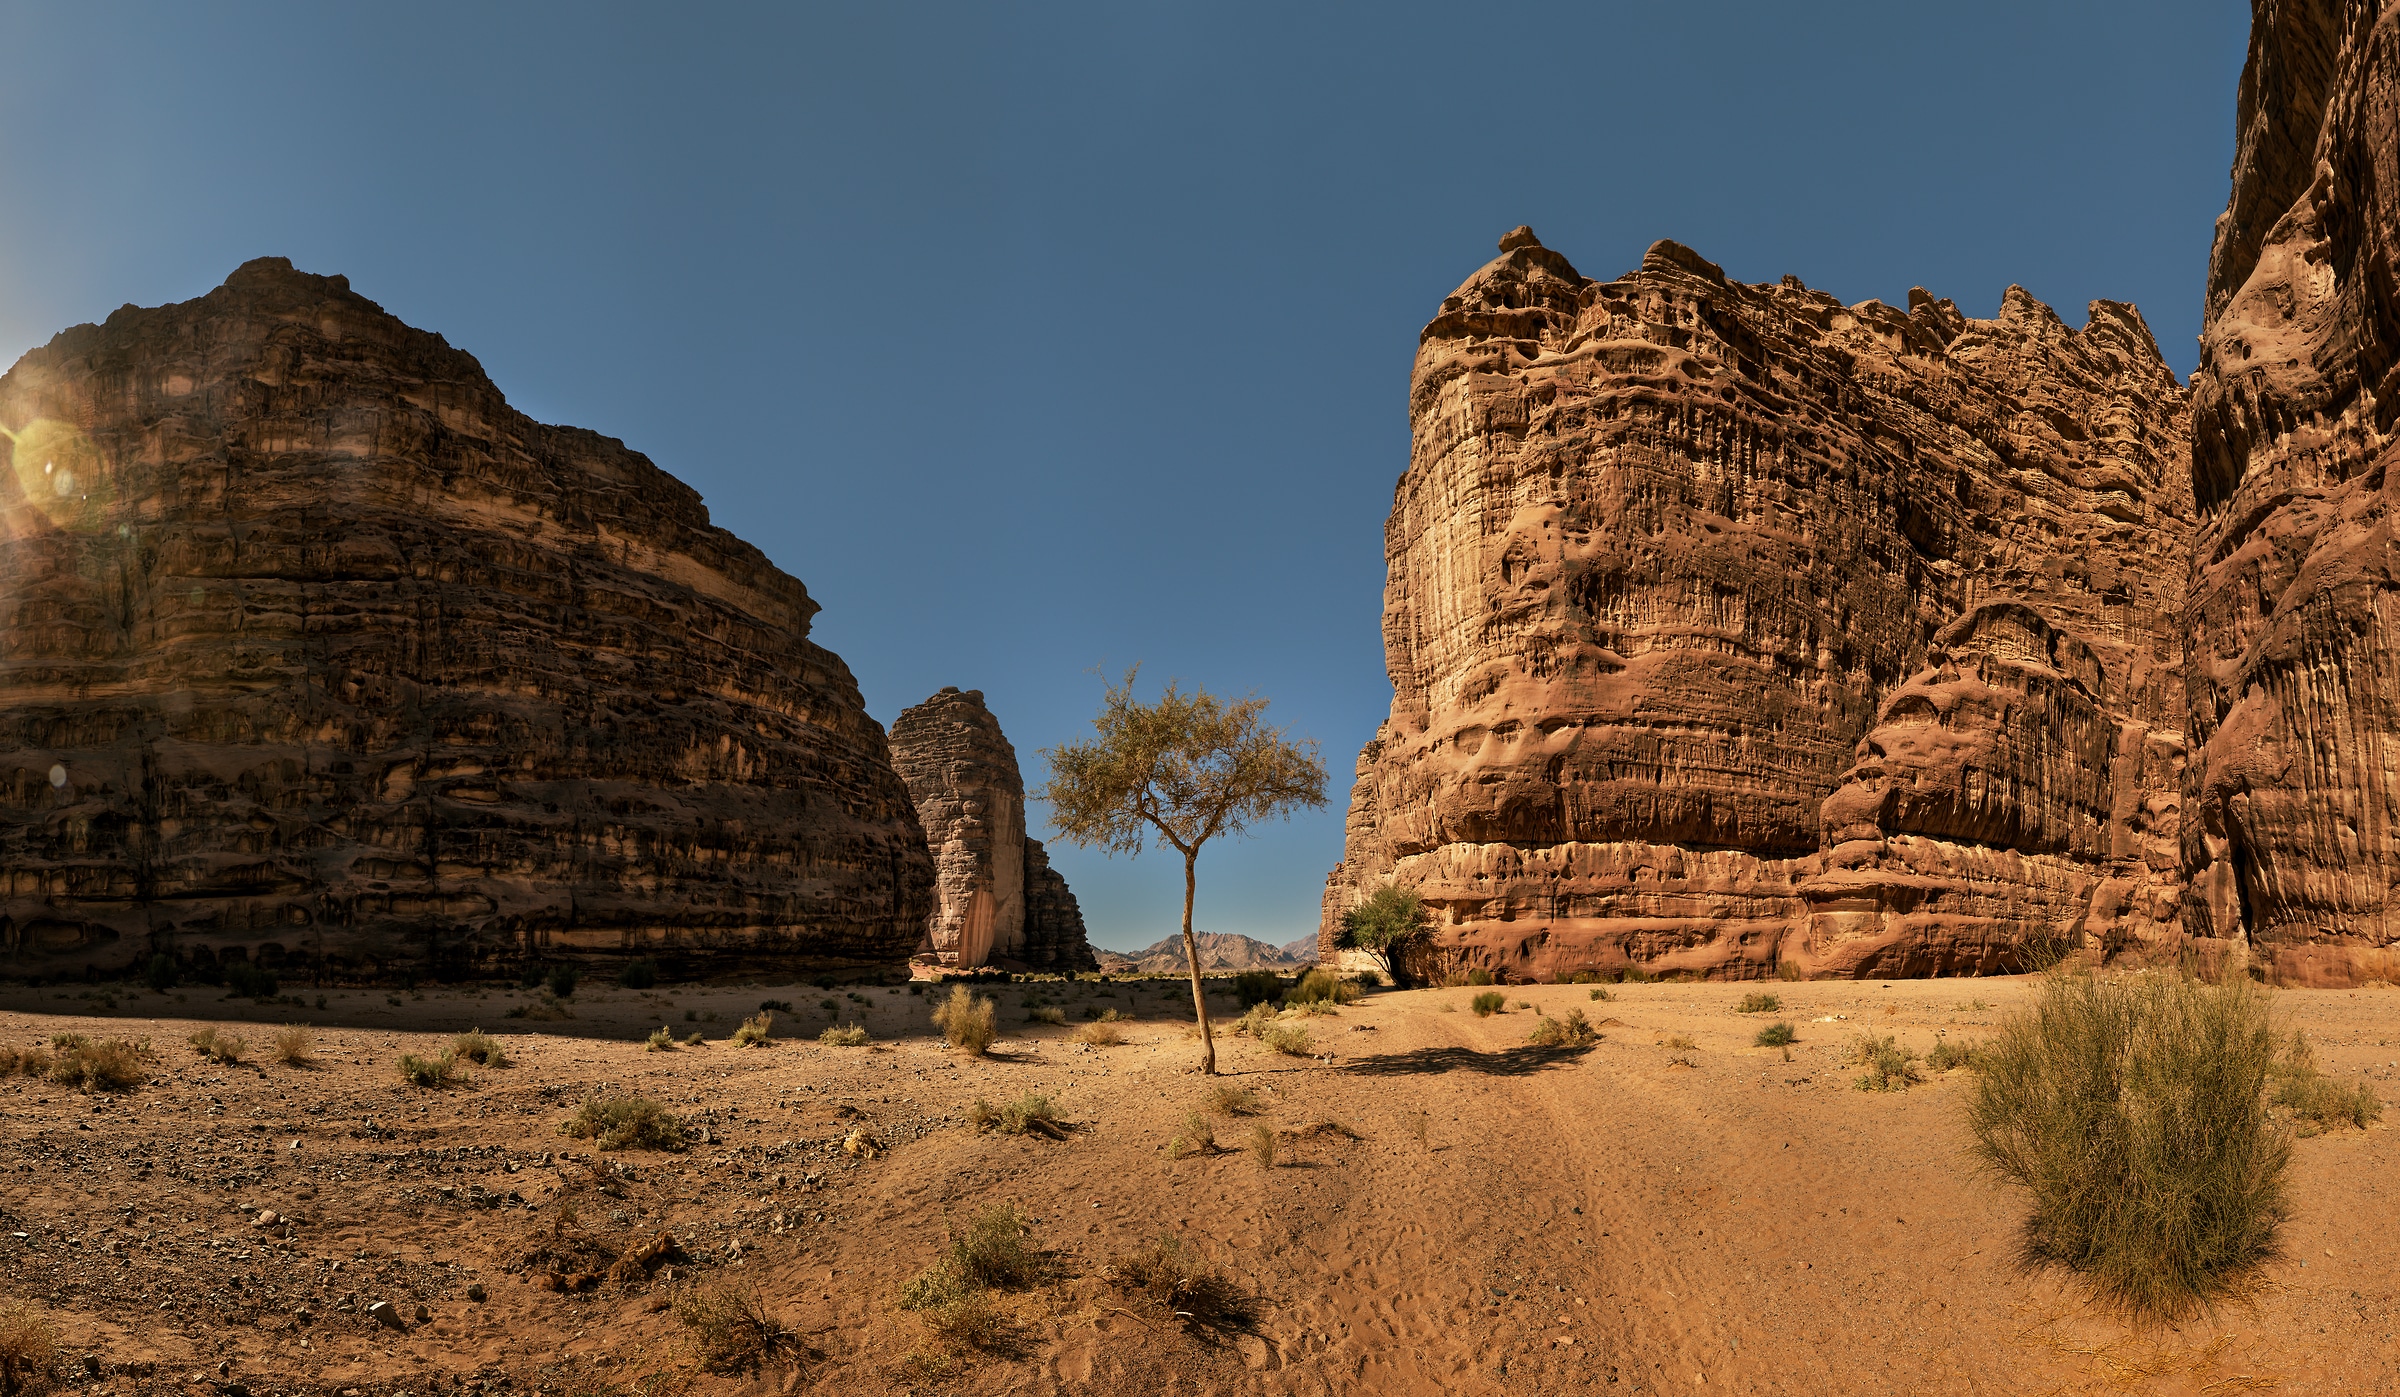 1,194 megapixels! A very high resolution, large-format VAST photo print of a tree in an arid landscape; nature photograph created by Peter Rodger in Neom, Tabuk, Saudi Arabia.